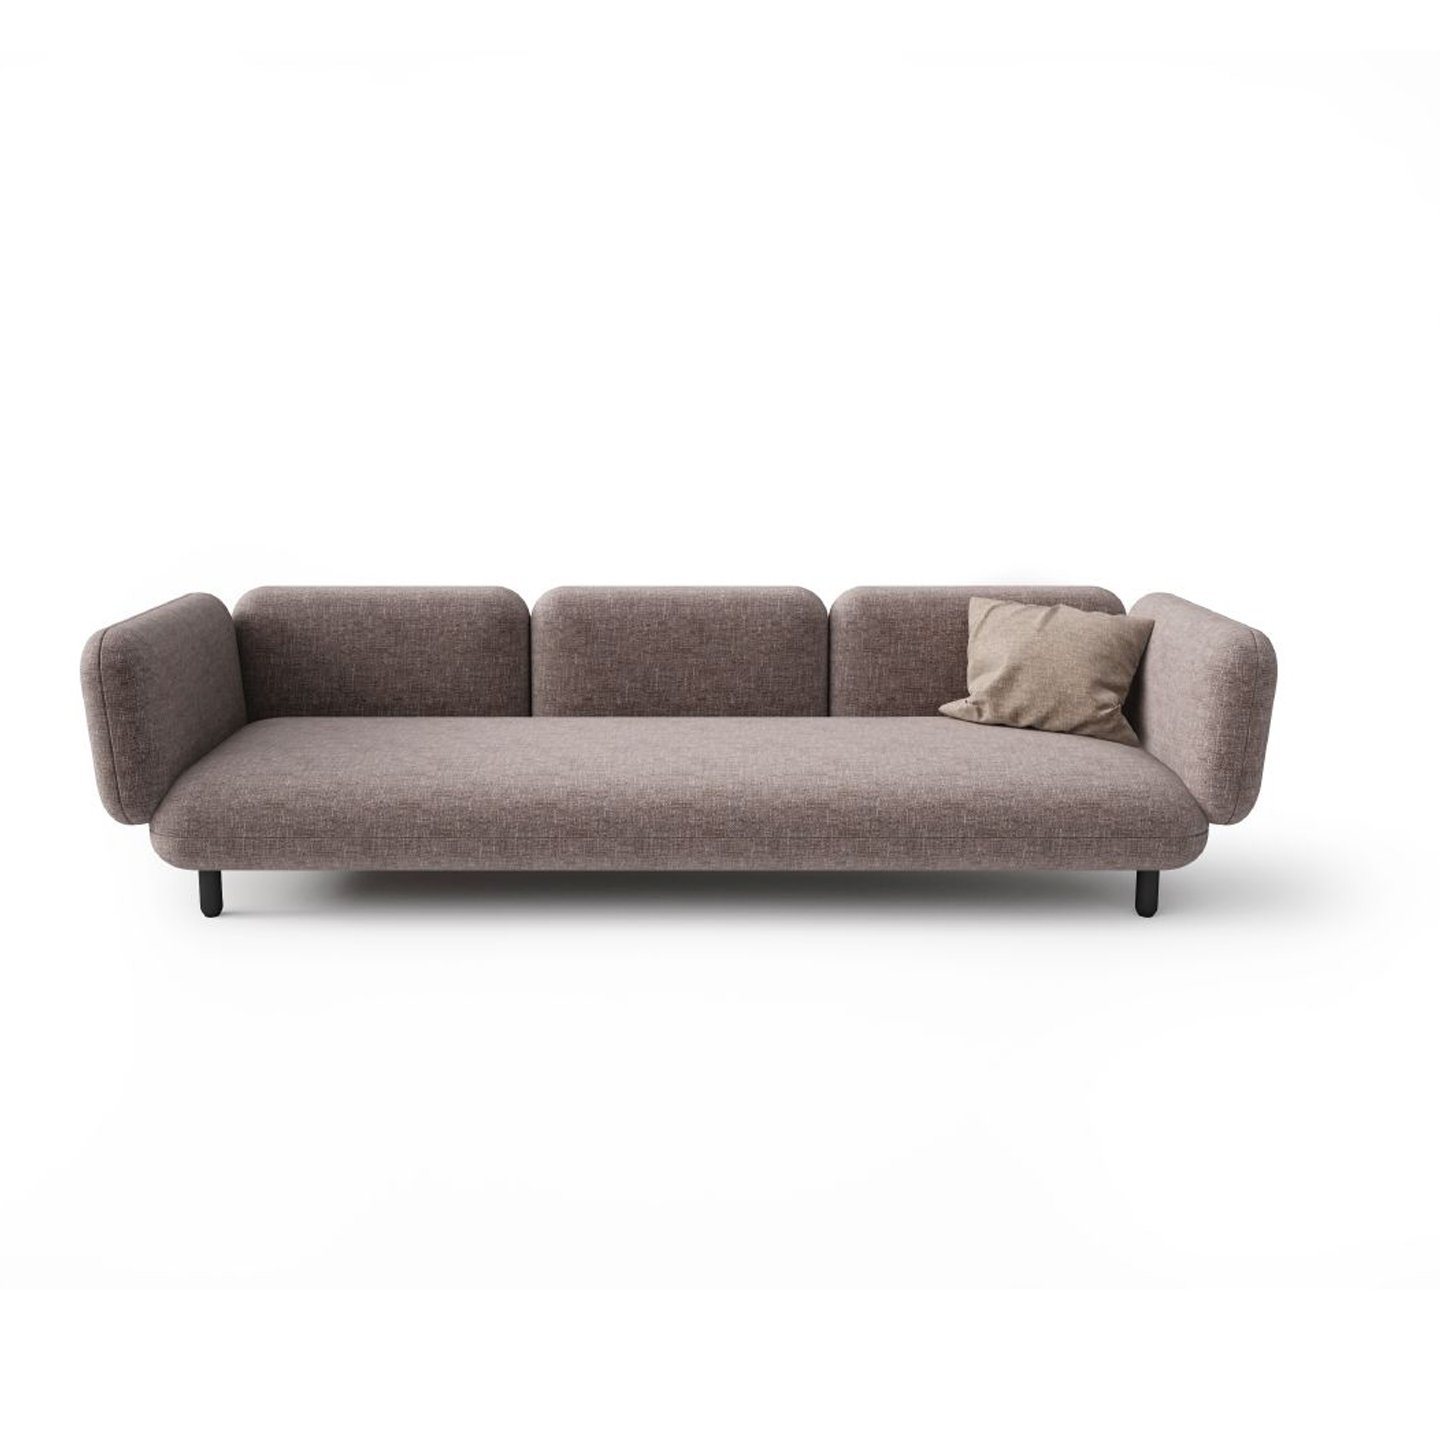 Haworth Hobo lounge sofa in brown upholstery front view